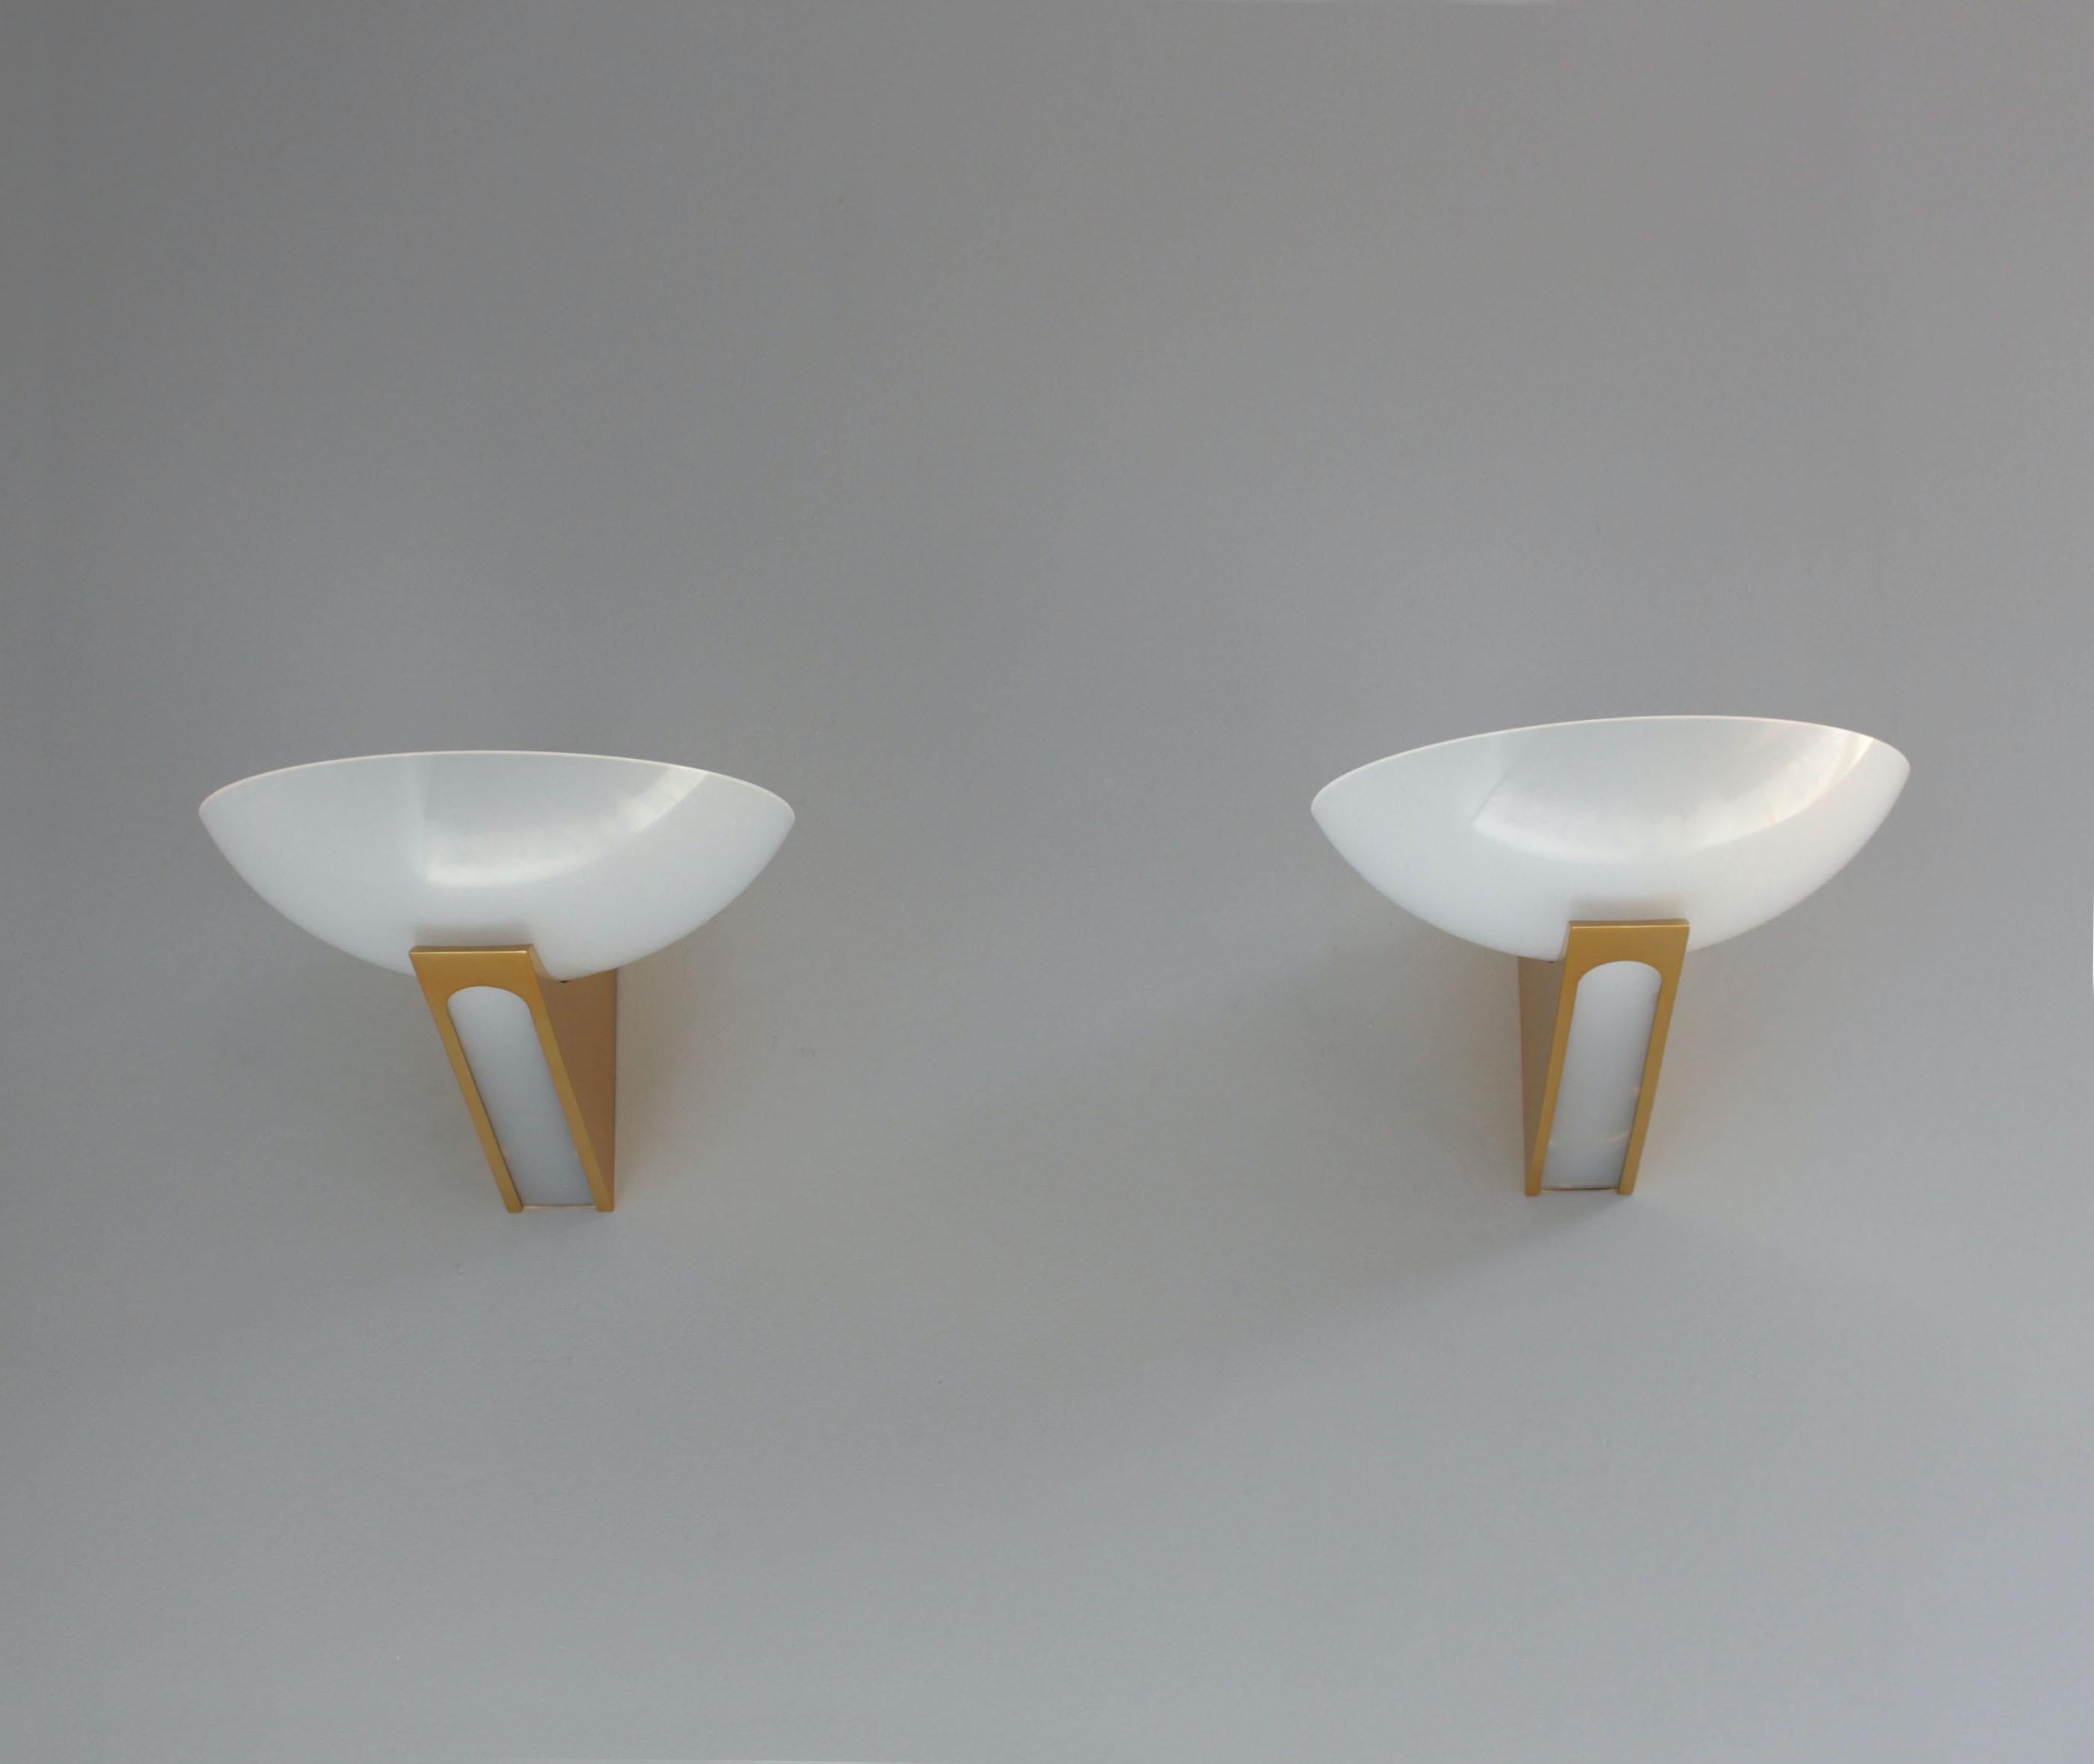 A fine pair of Mid-Century wall lights with polished brass mounts with cutout reveals, supporting lucite bowl-shaped shades.